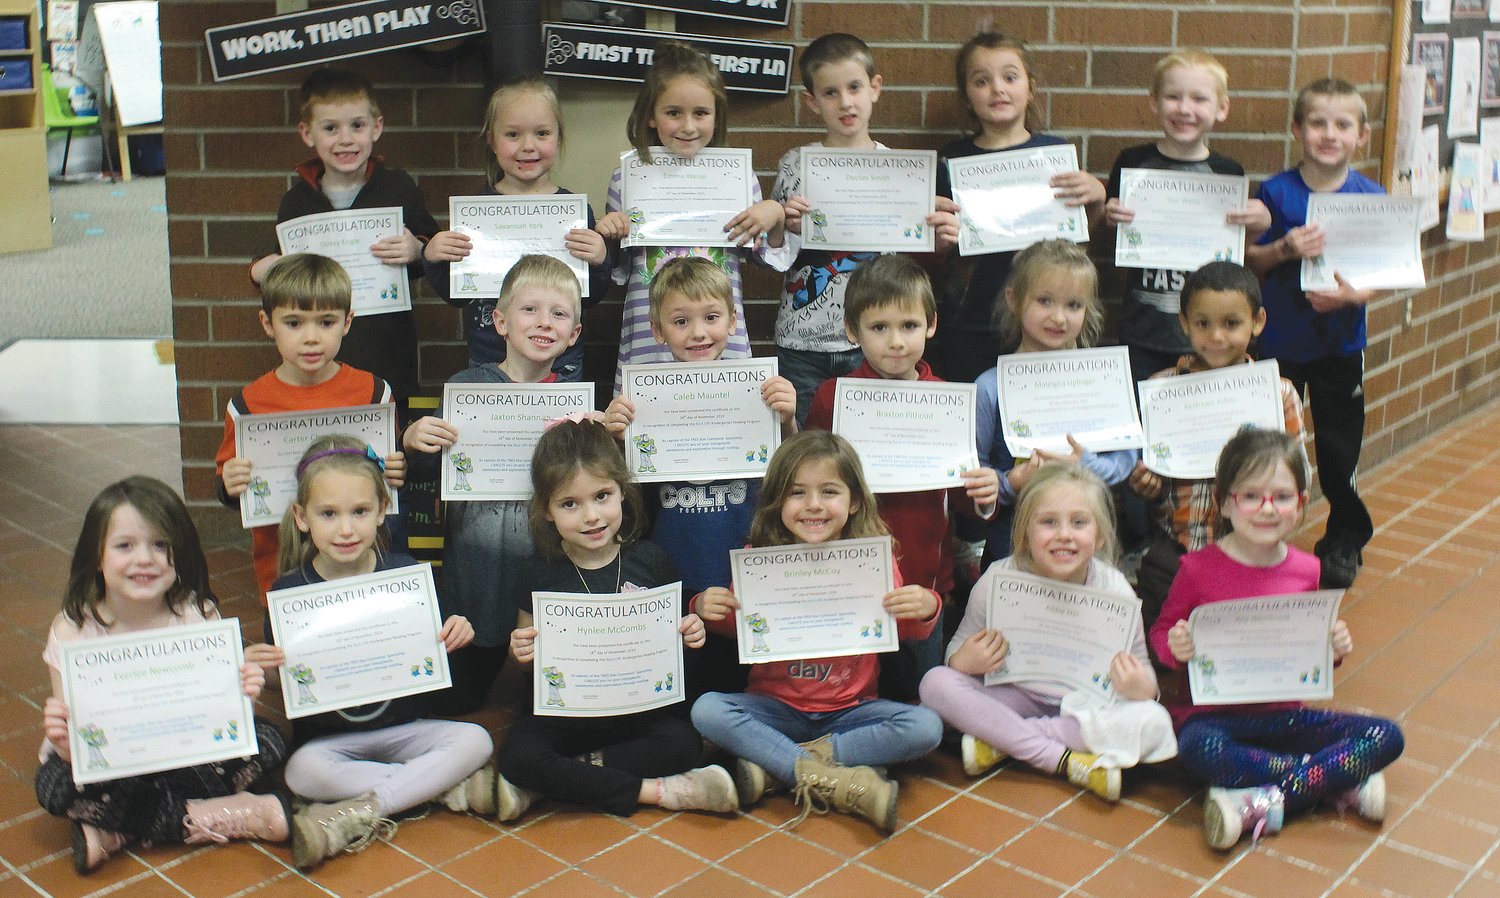 Turkey Run Elementary kindergarten students were recently recognized for completing the Homestart Reading Program. Students were sent home a folder with a children